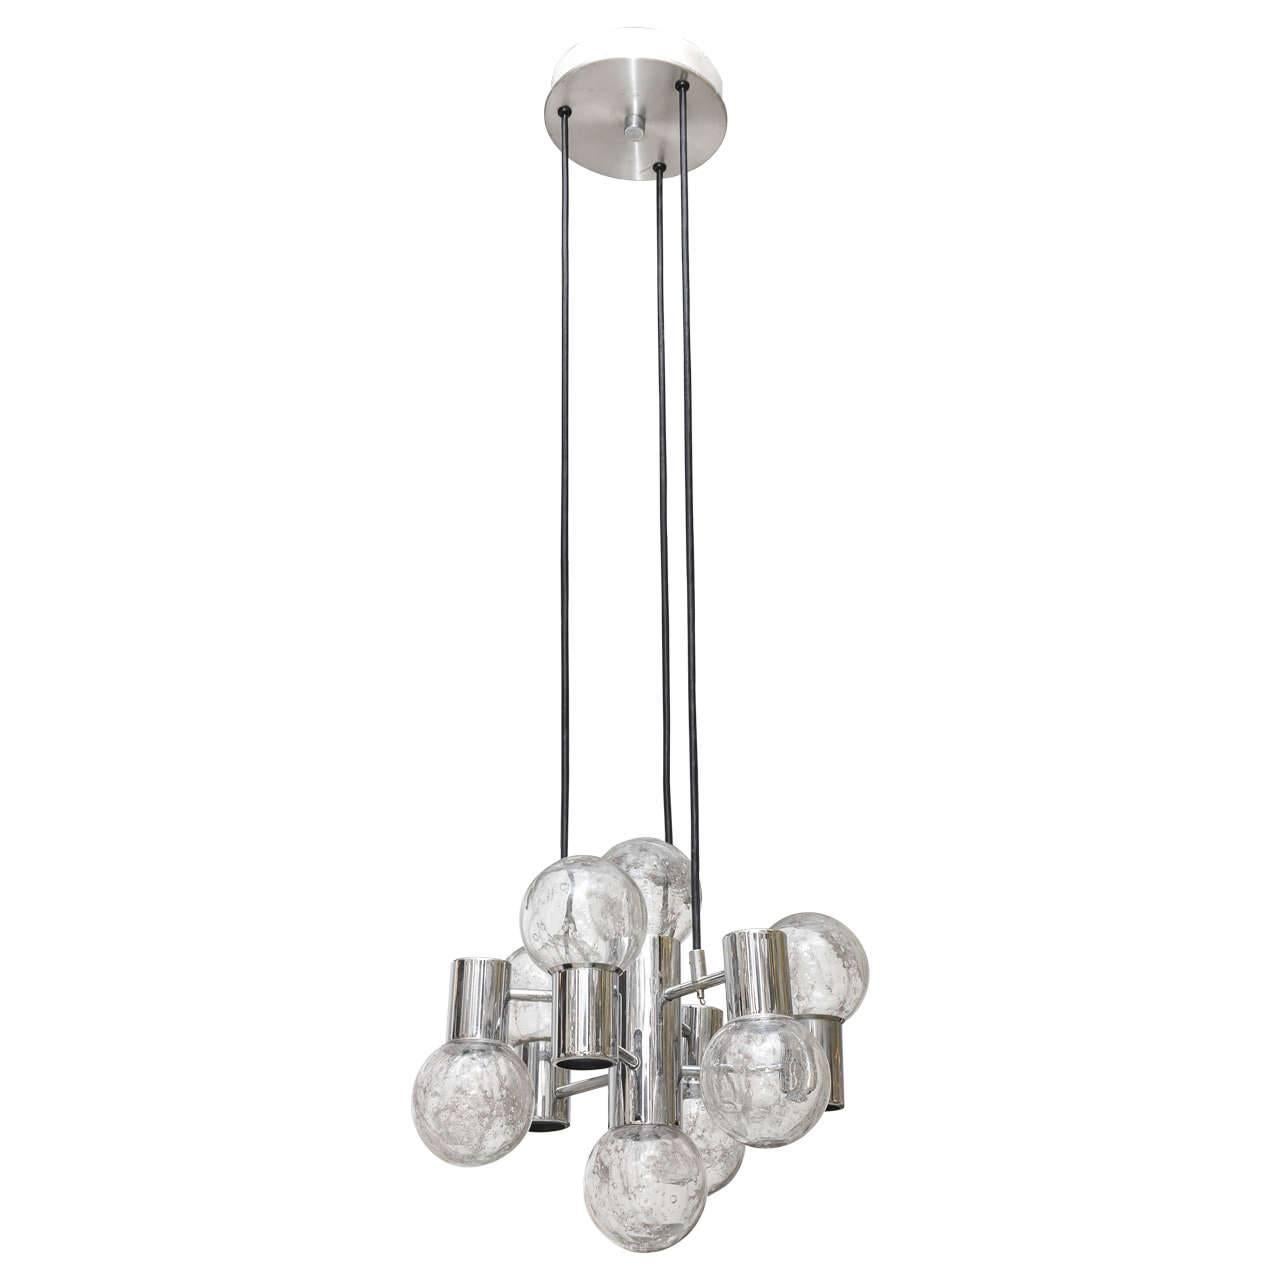 Mid-Century Modern Chrome and Glass Pendant Light Fixture For Sale